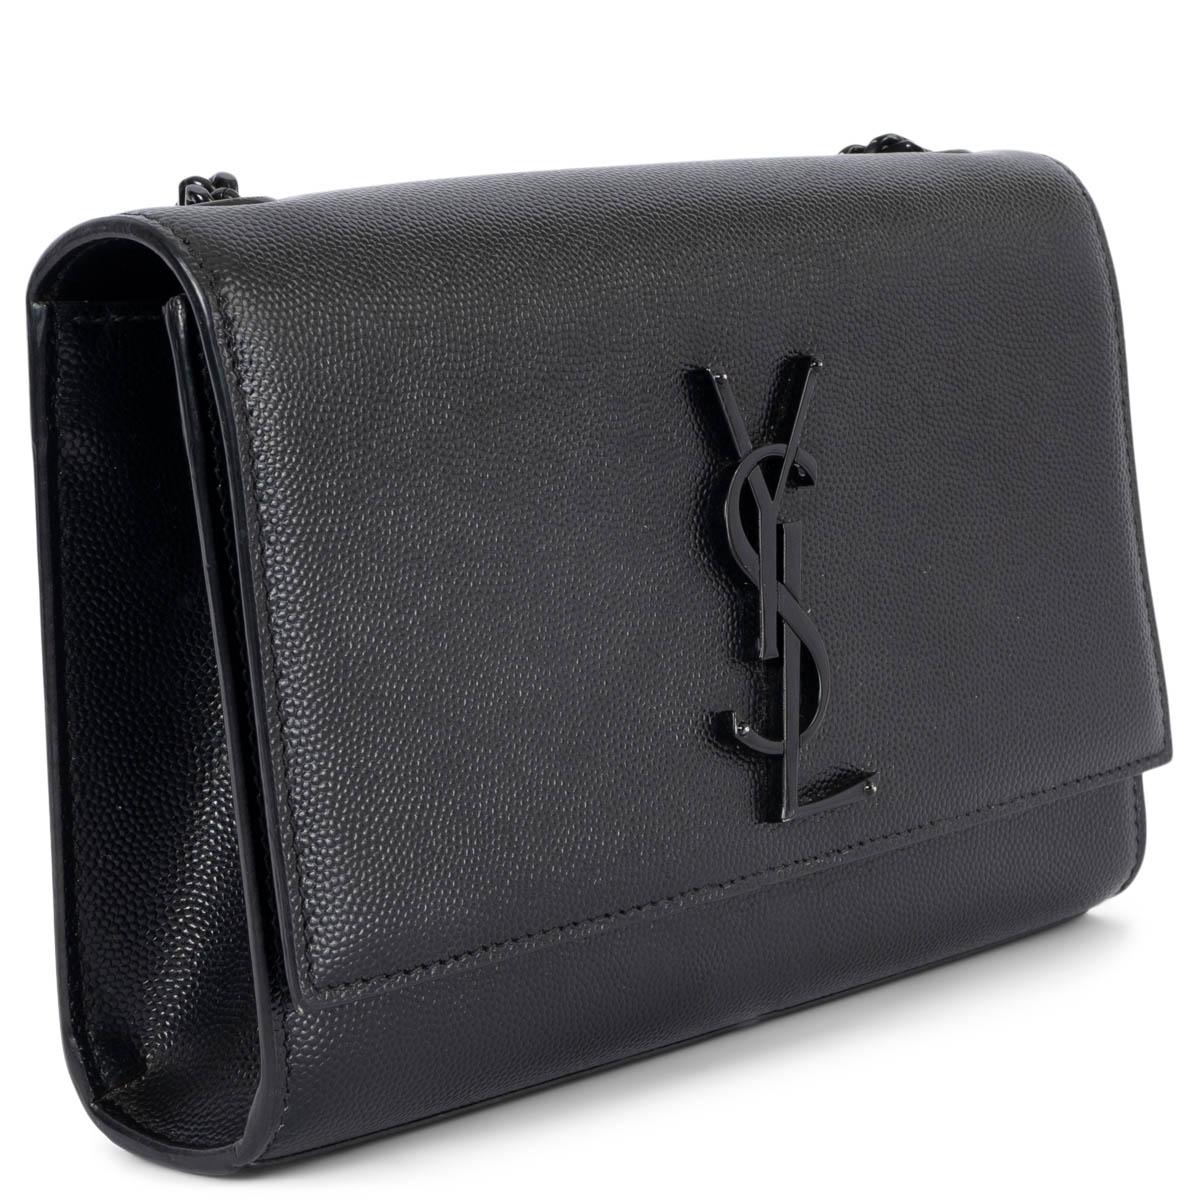 100% authentic Saint Laurent Kate Small flap shoulder bag in black Grain de Poudre leather with black hardware. Closes with a magnetic snap under the flap. Lined in black grosgrain fabric with an open pocket against the back. Has been carried with